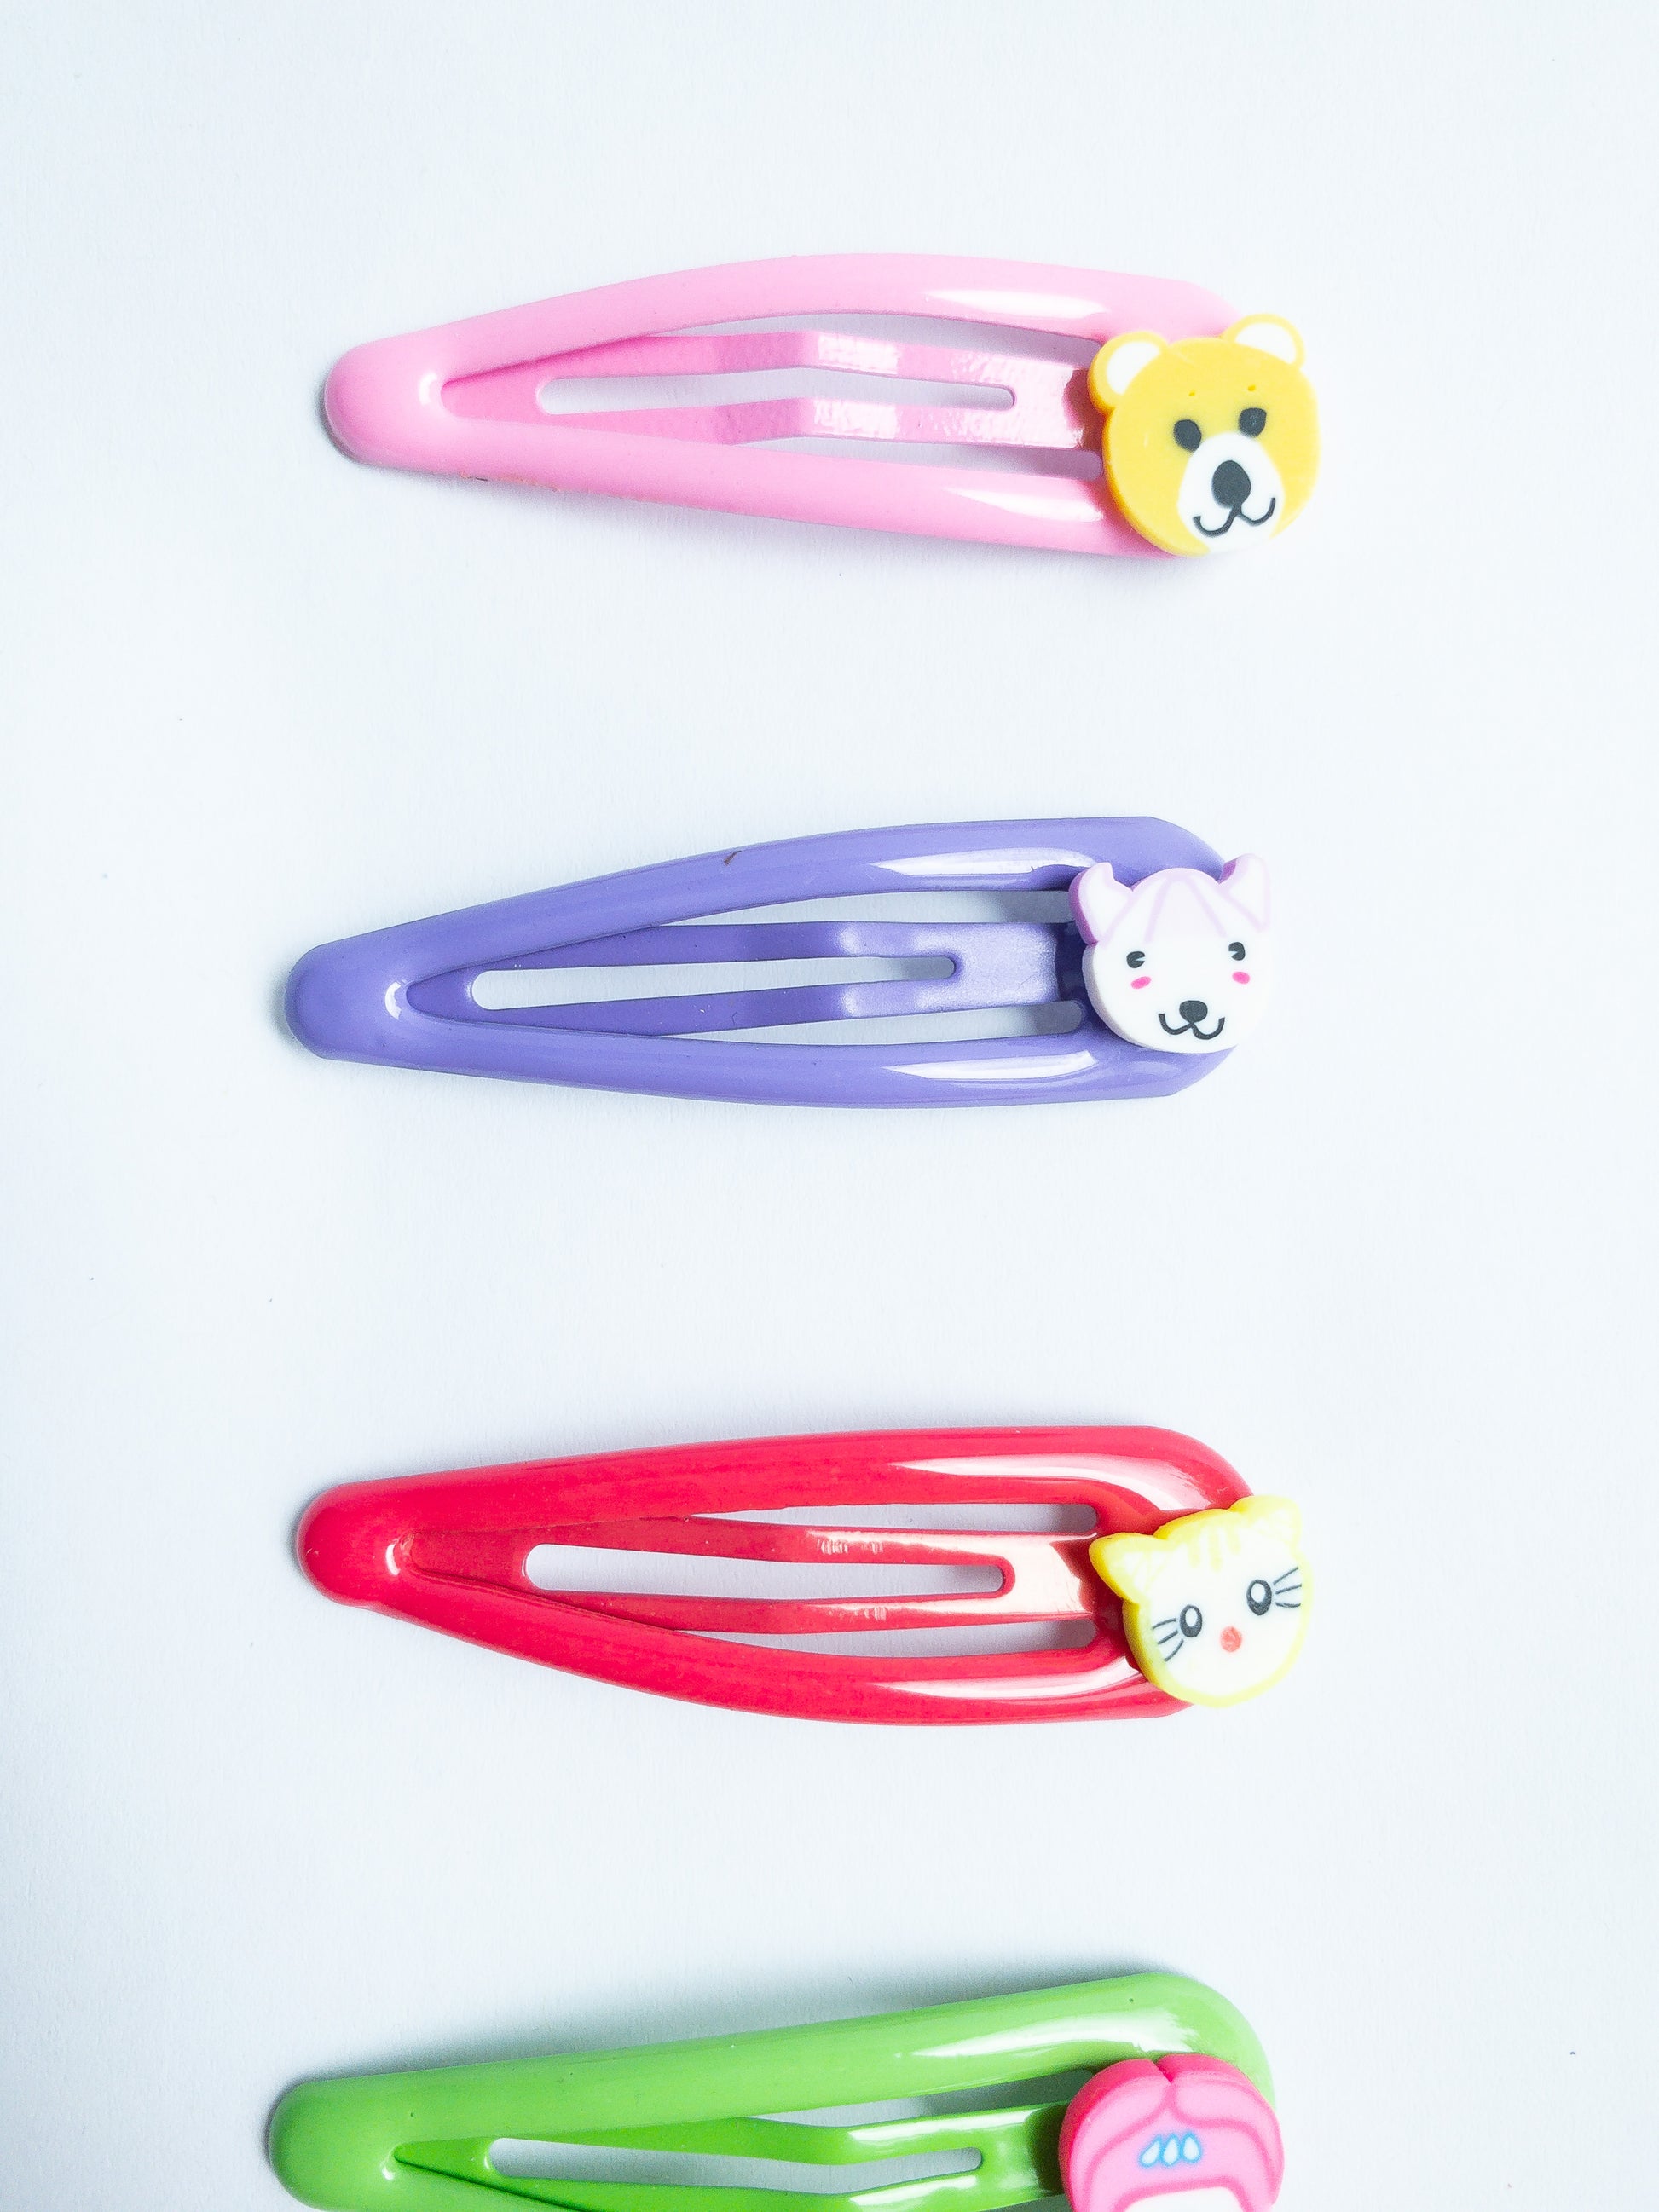 Adorn your 'do with these cute little animal hair clips! Featuring an array of critters, these super-cute clips are perfect for adding a bit of fun to your look. Five bright colored snap clips.